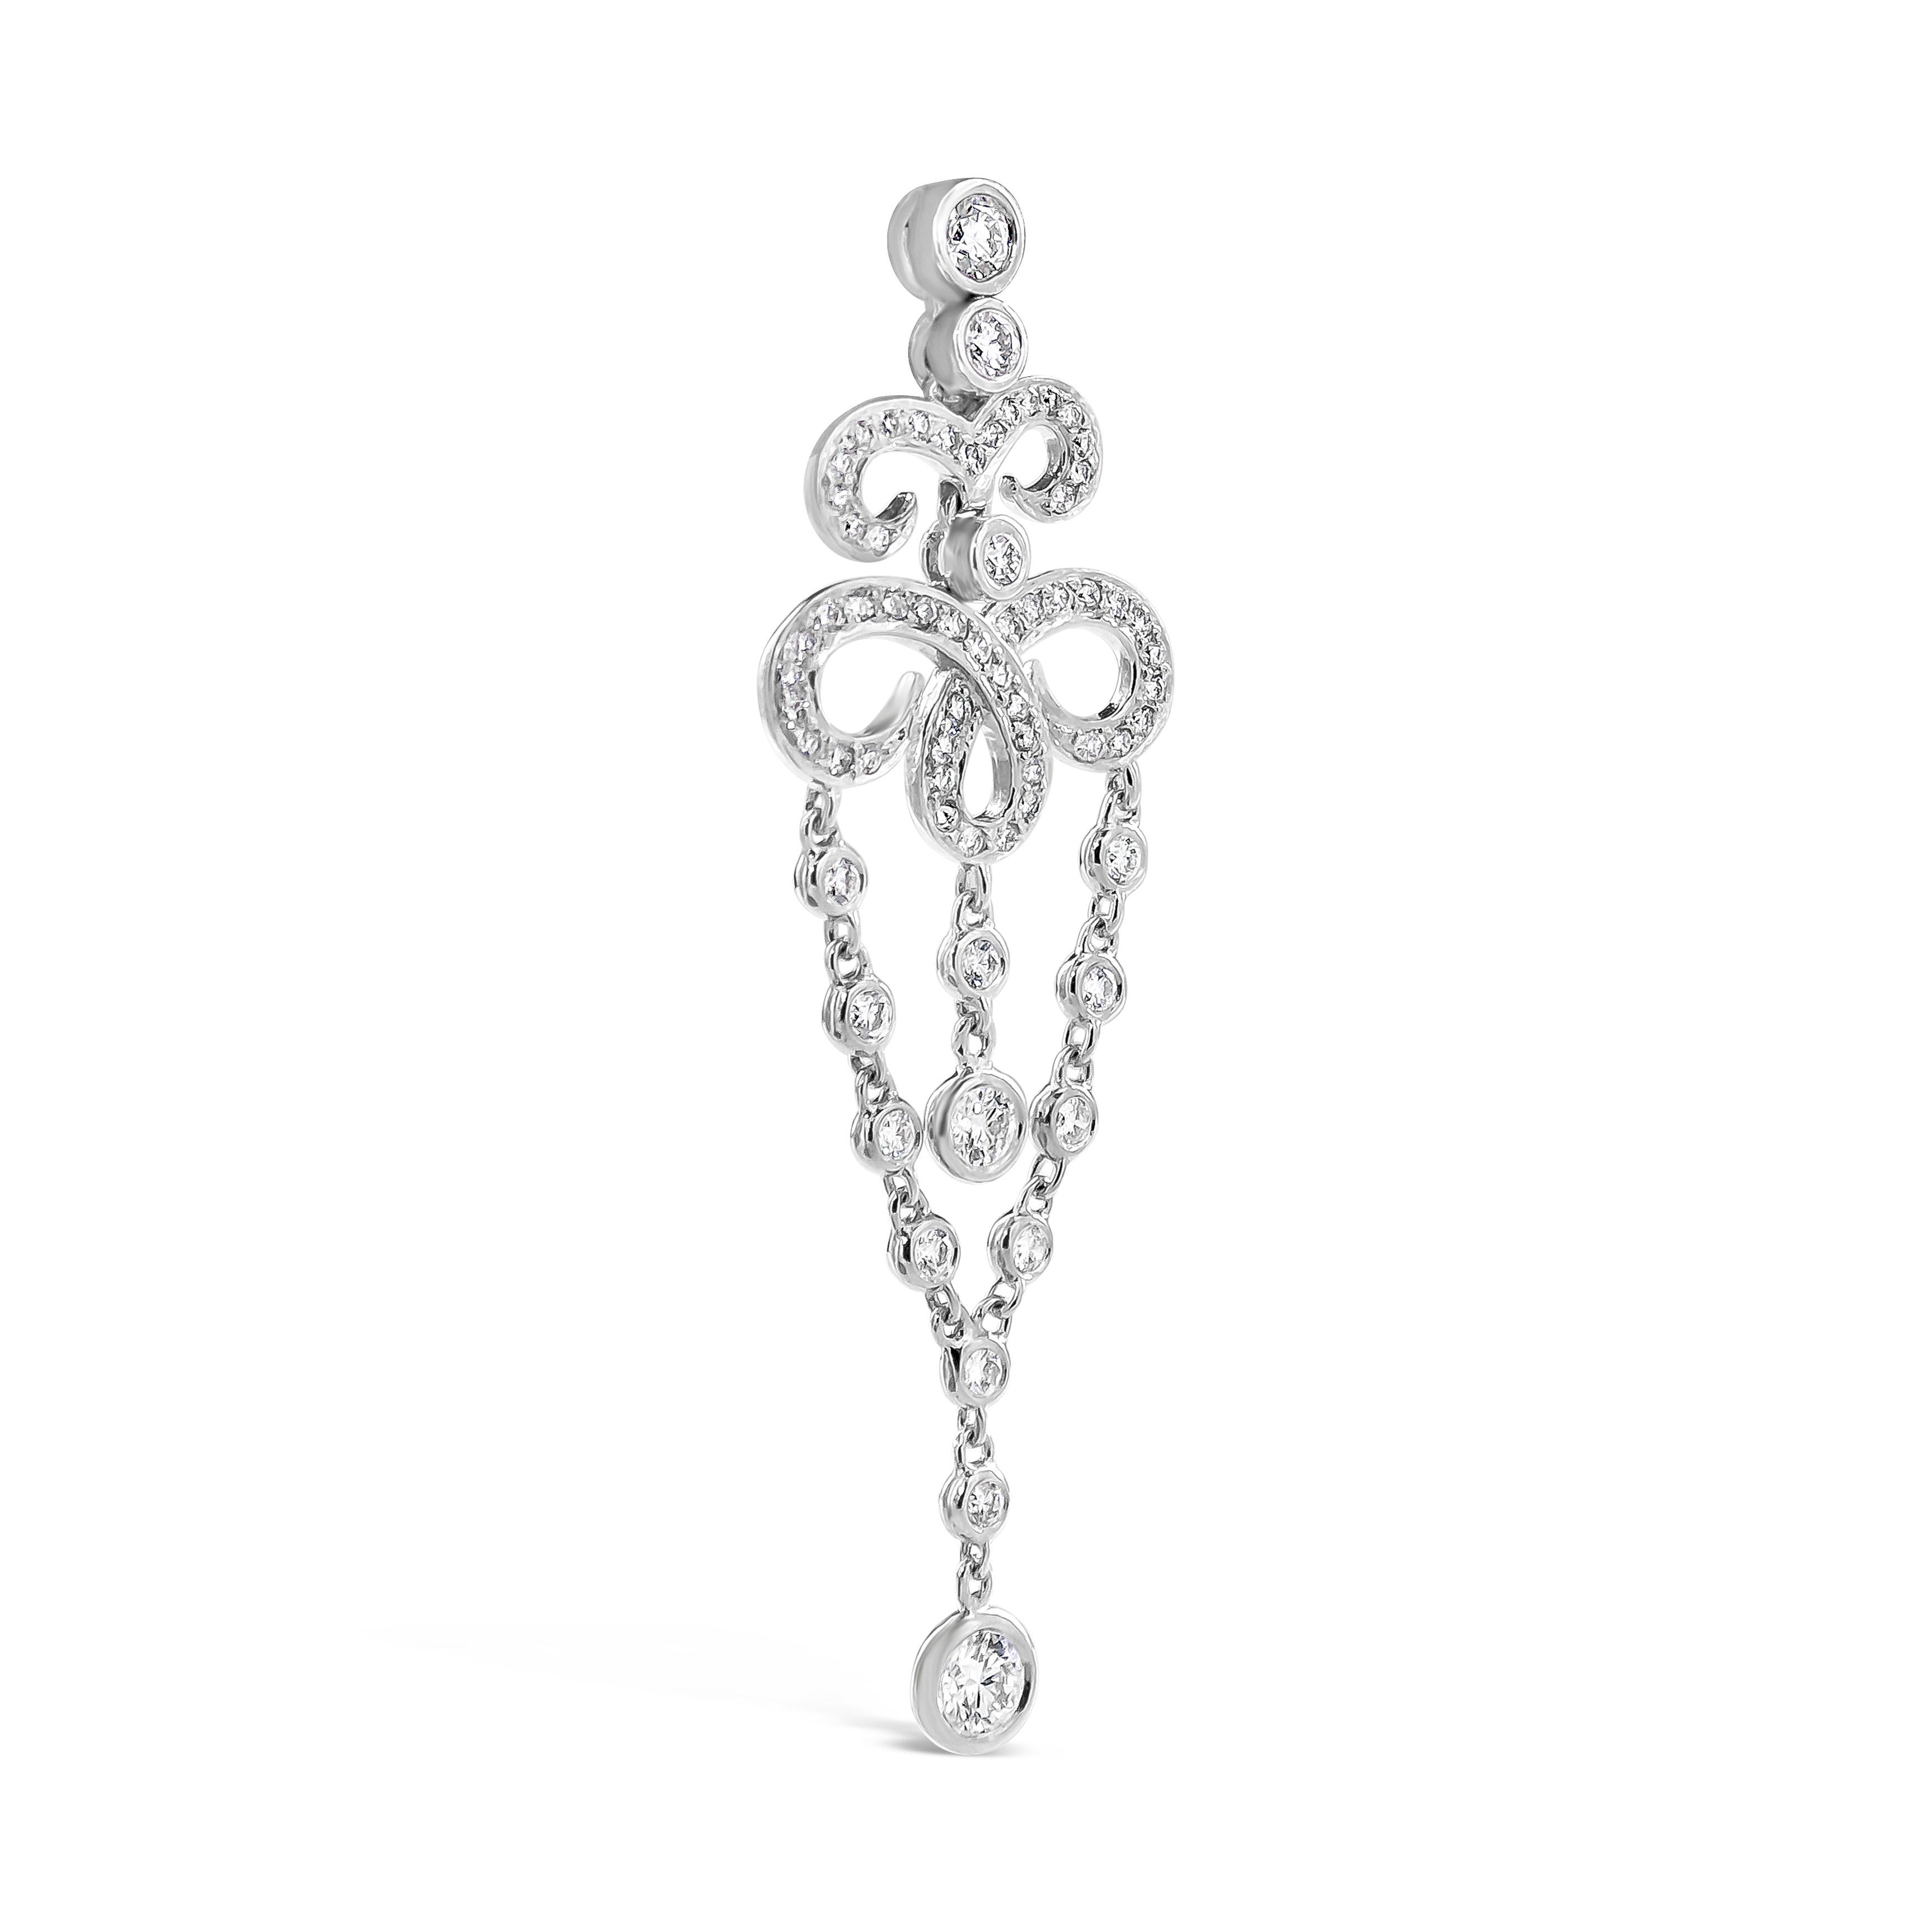 This fashionable pair of fringe dangle earrings showcases an open-work filigree design, encrusted with round diamonds, accented by suspending diamonds by the yard chain. Diamonds weigh 1.85 carats total.Made in 18K White Gold.

Style available in